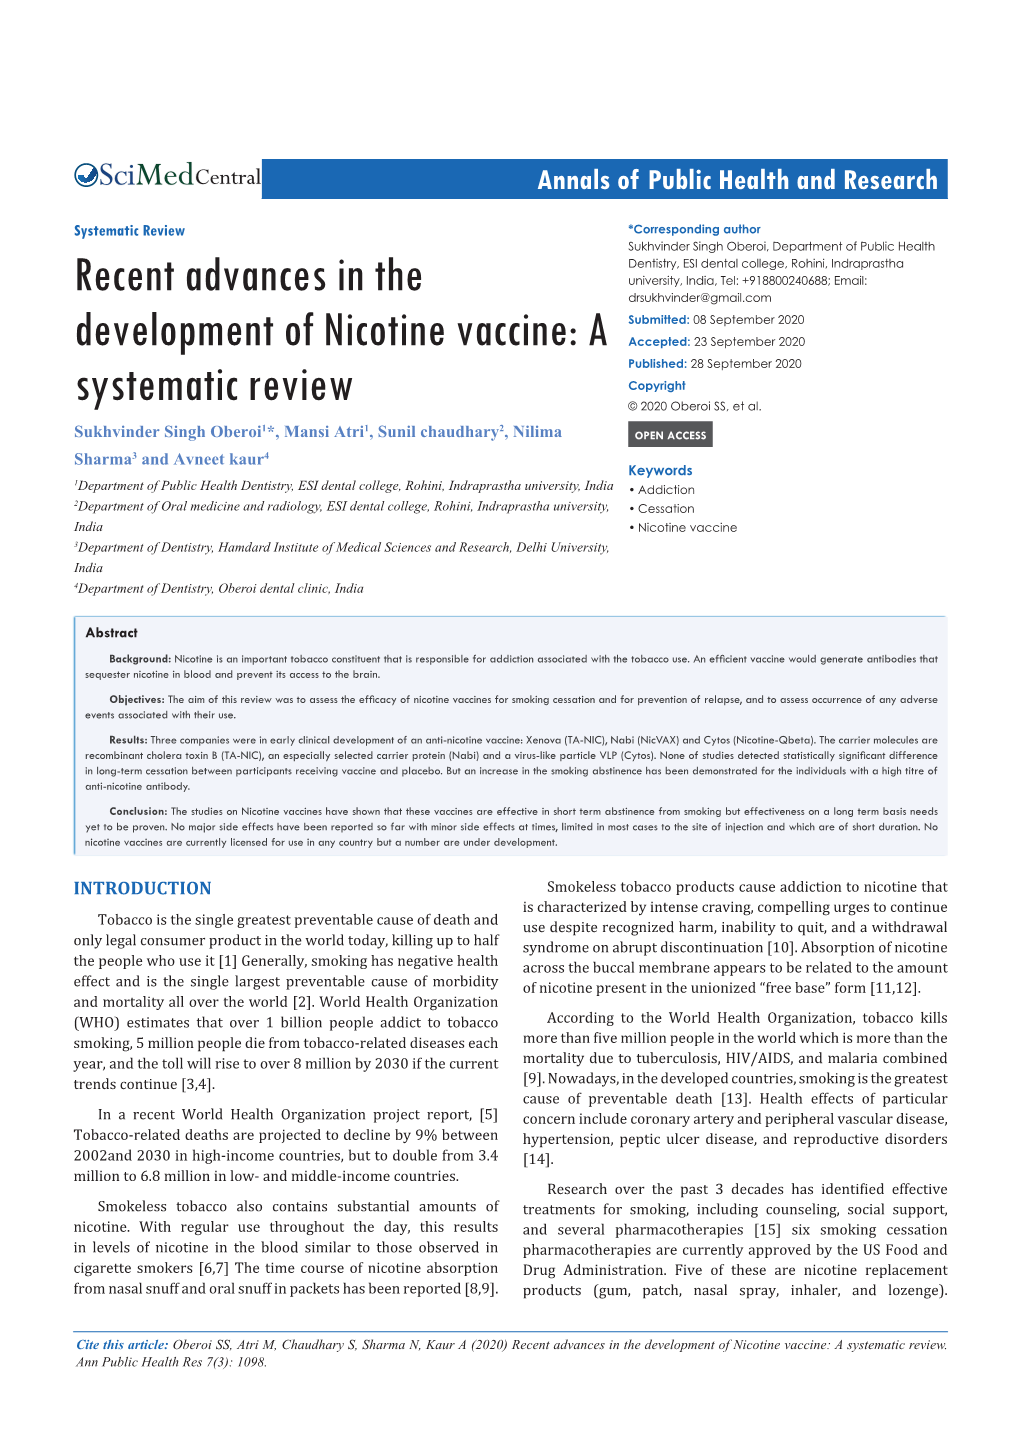 Recent Advances in the Development of Nicotine Vaccine: a Systematic Review